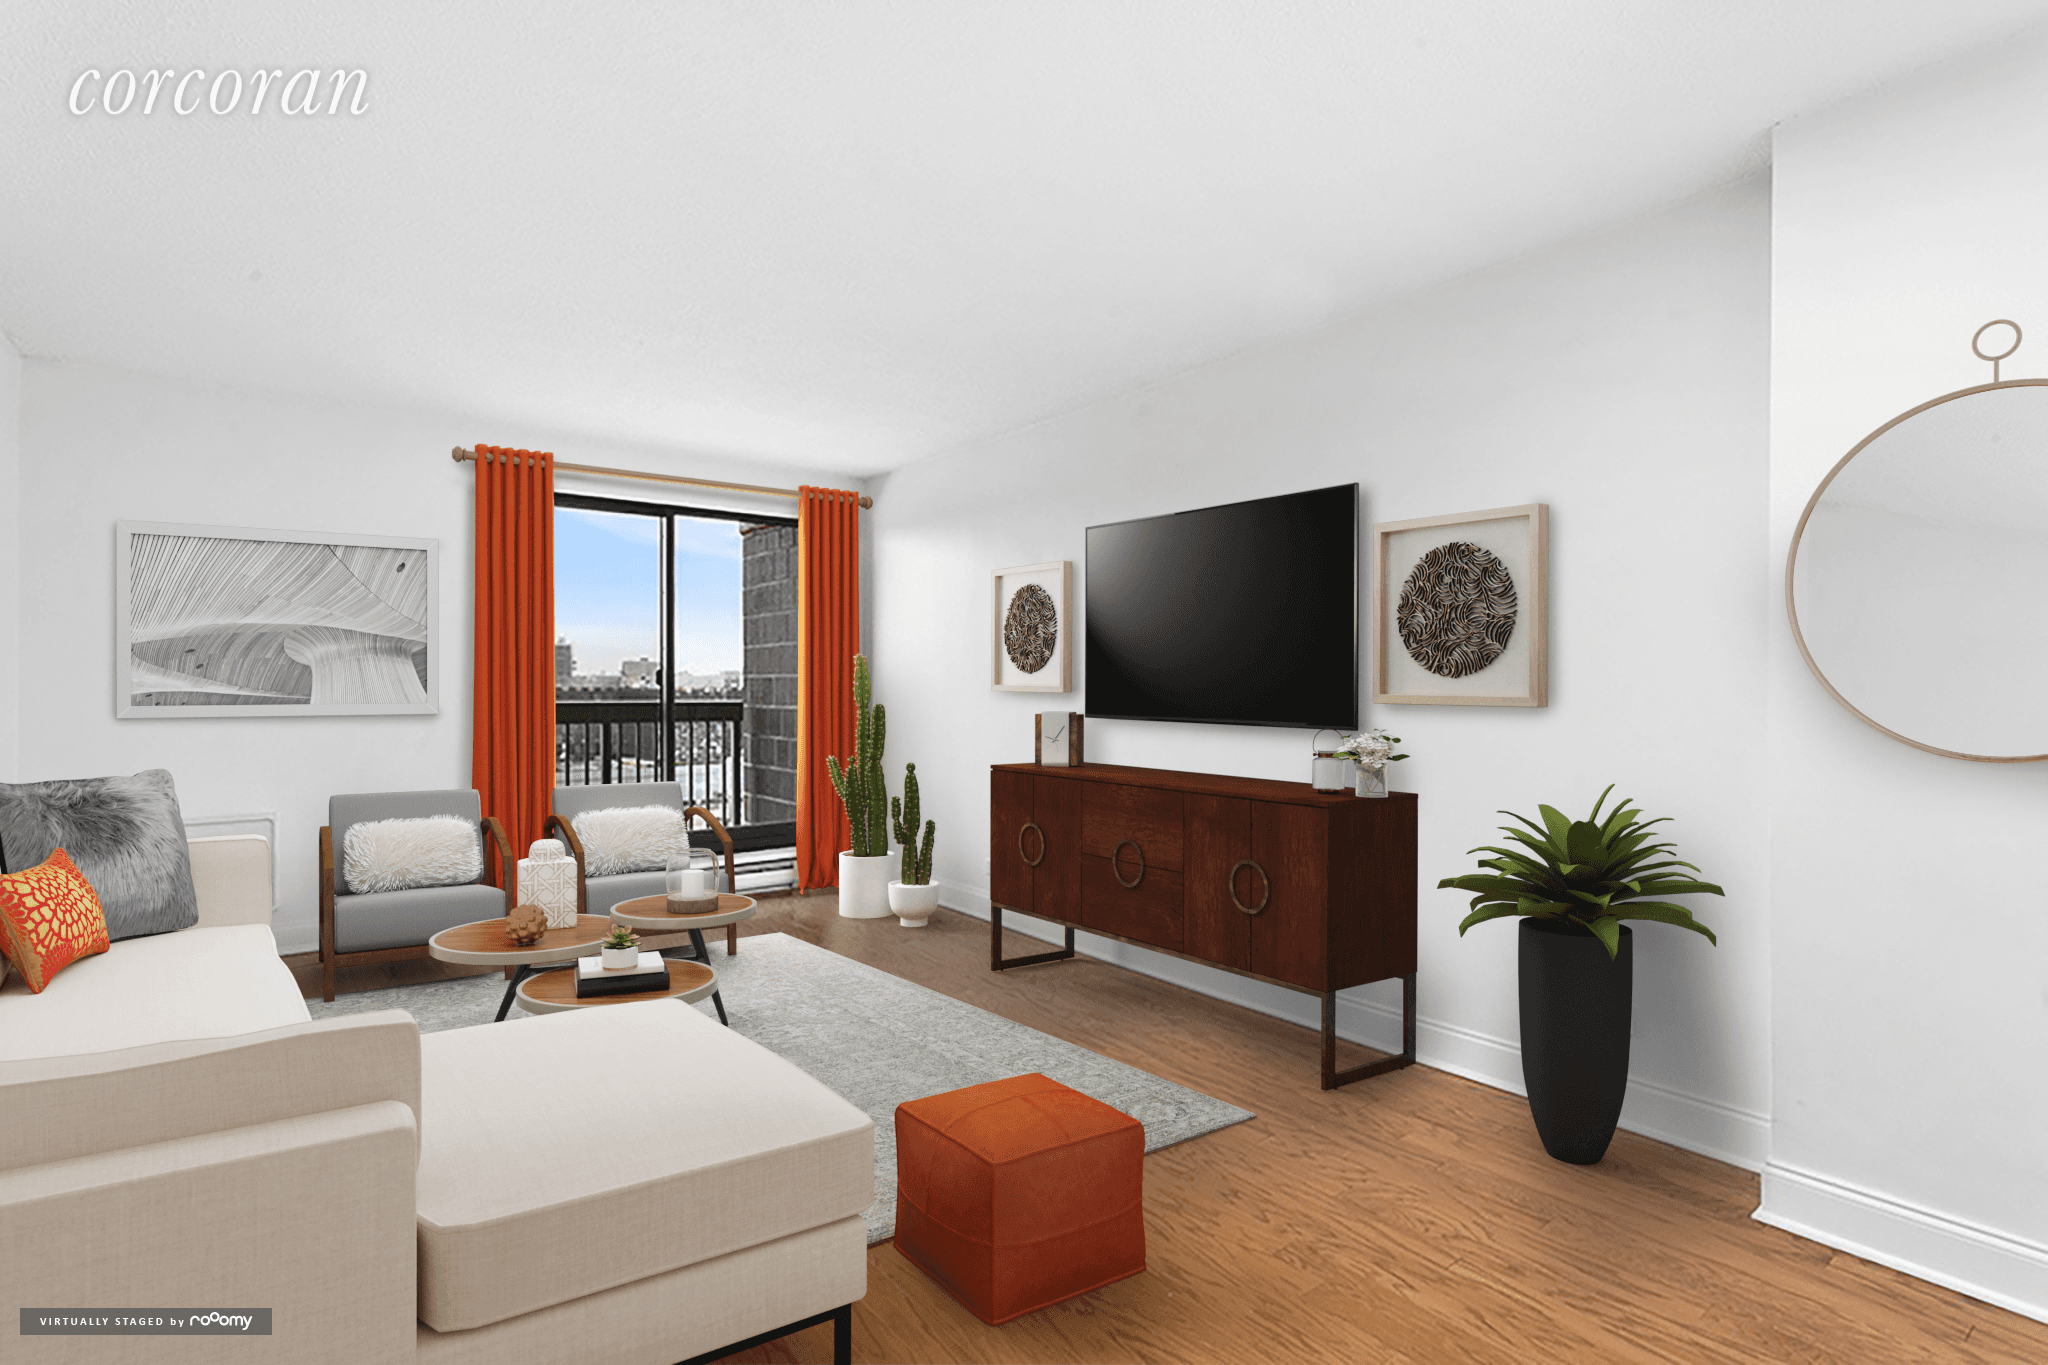 Limited Time Offer No Broker Fee and 1 Month Free33rd Floor 2 BR 1Bath with Balcony NYC Skyline ViewsGetting to lower Manhattan from this spacious Two Bedroom One Bathroomapartment will ...